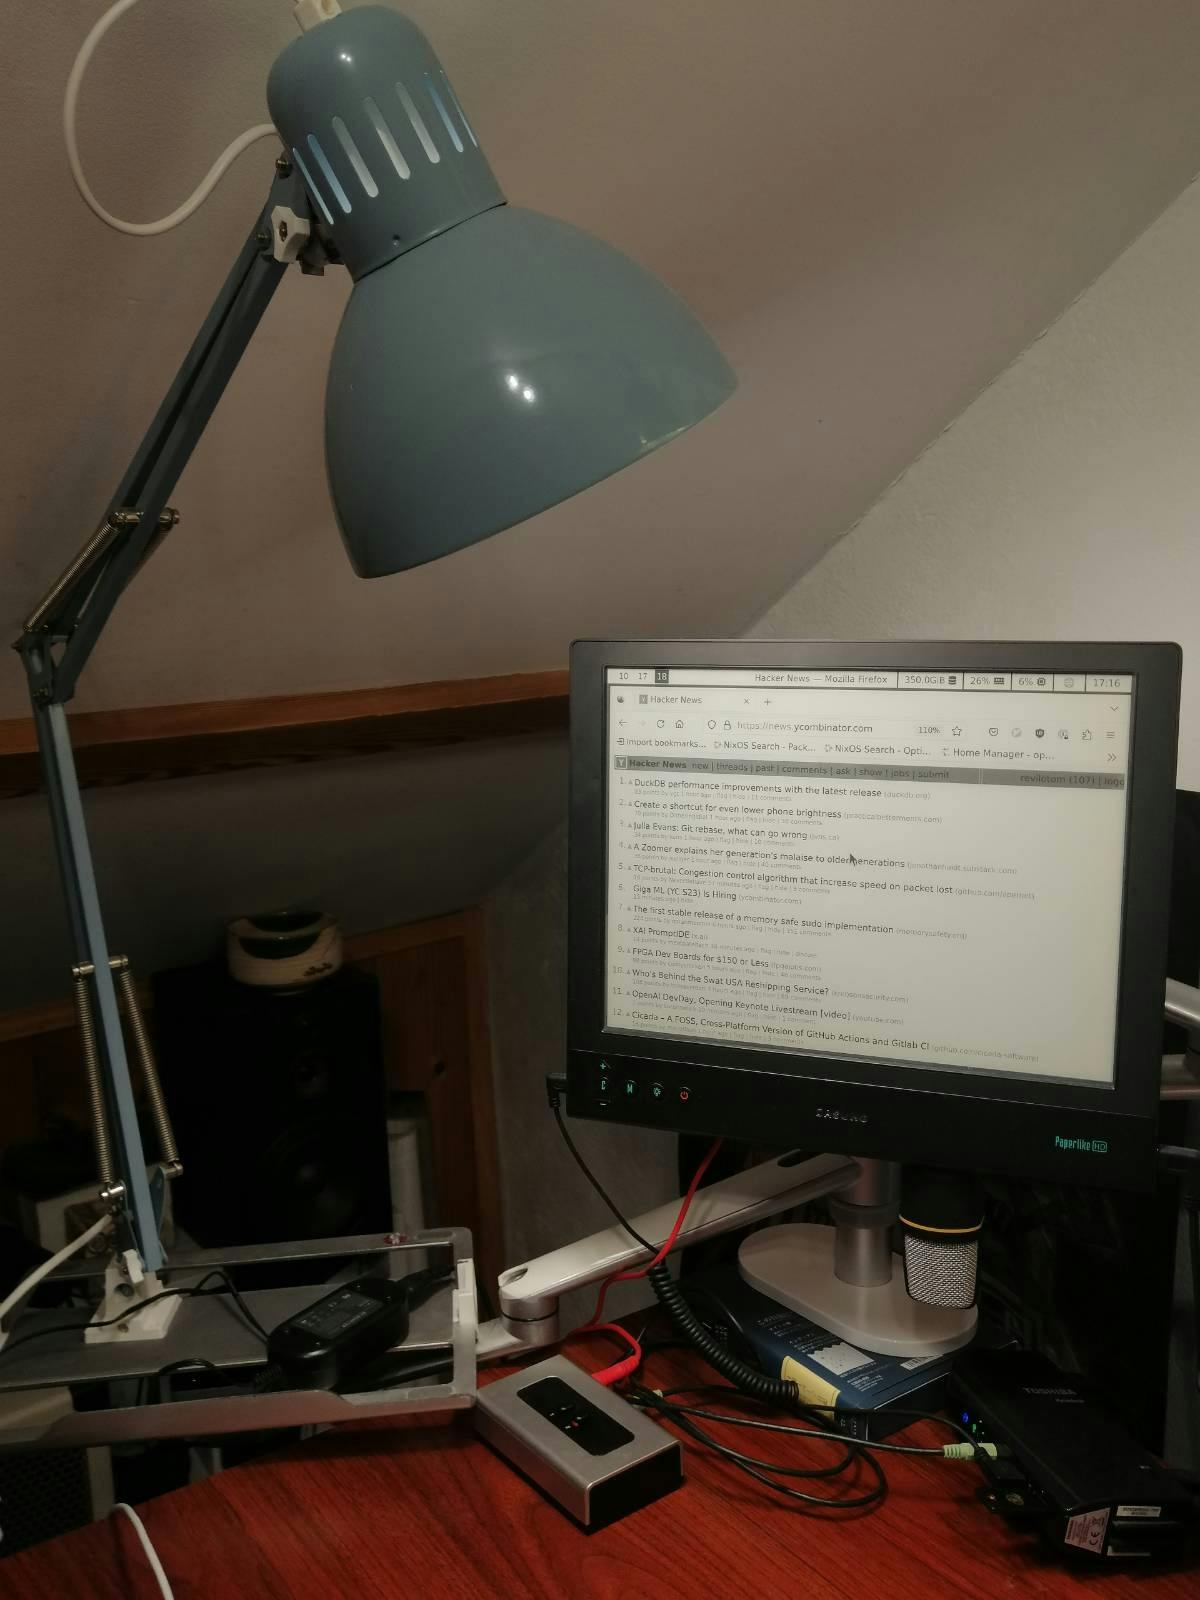 A lamp shining on an e-ink monitor